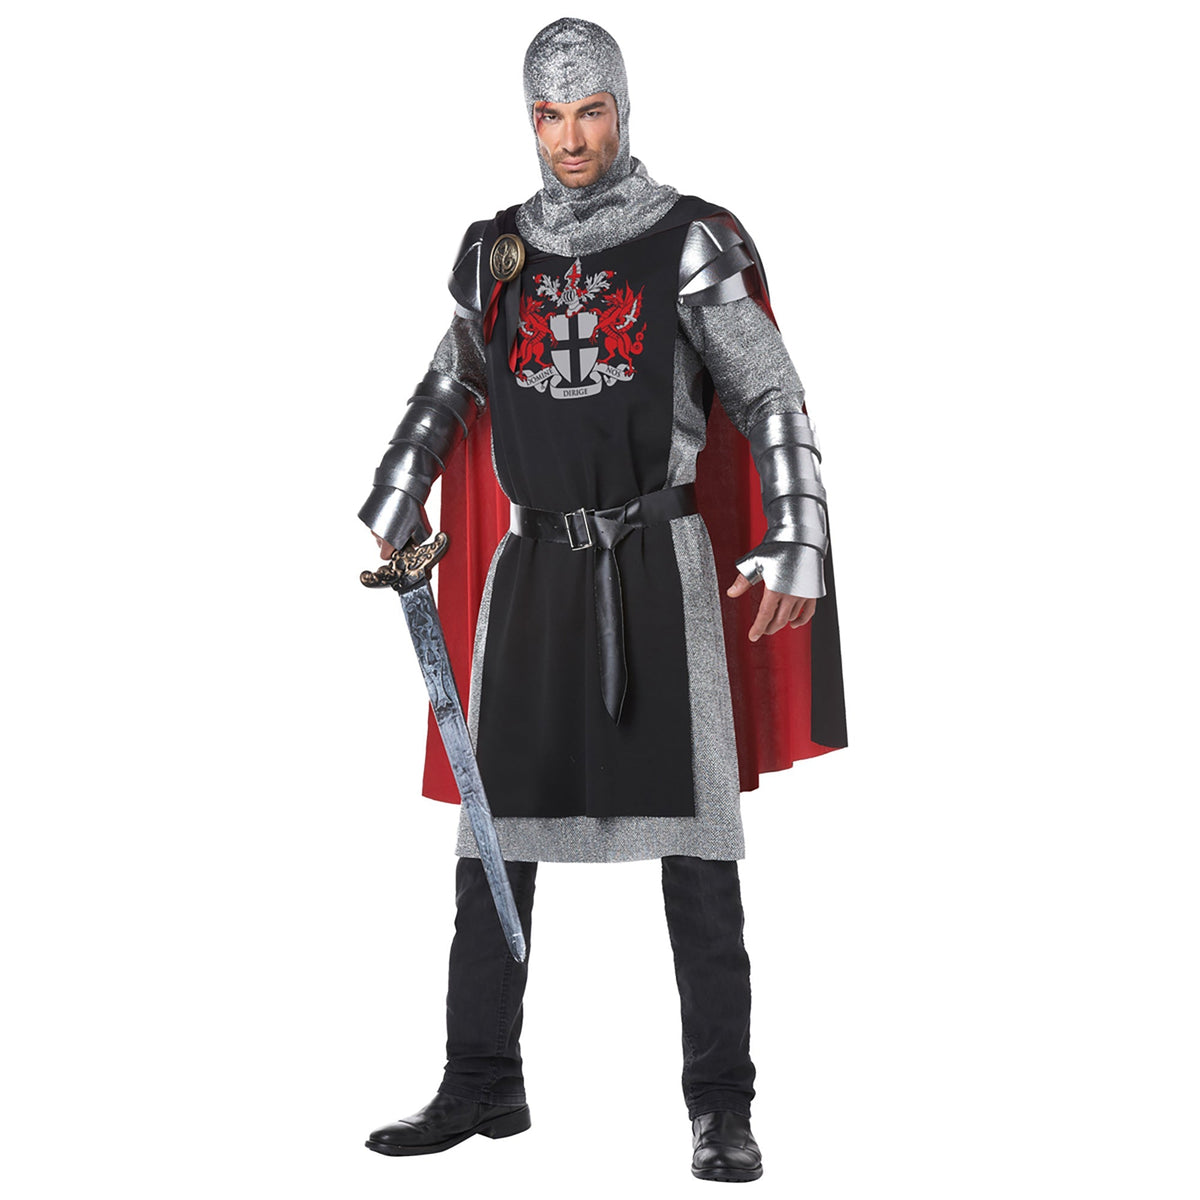 CALIFORNIA COSTUMES Costumes Medieval Knight Costume for Adults, Silver Tunic with Attached Sleeve